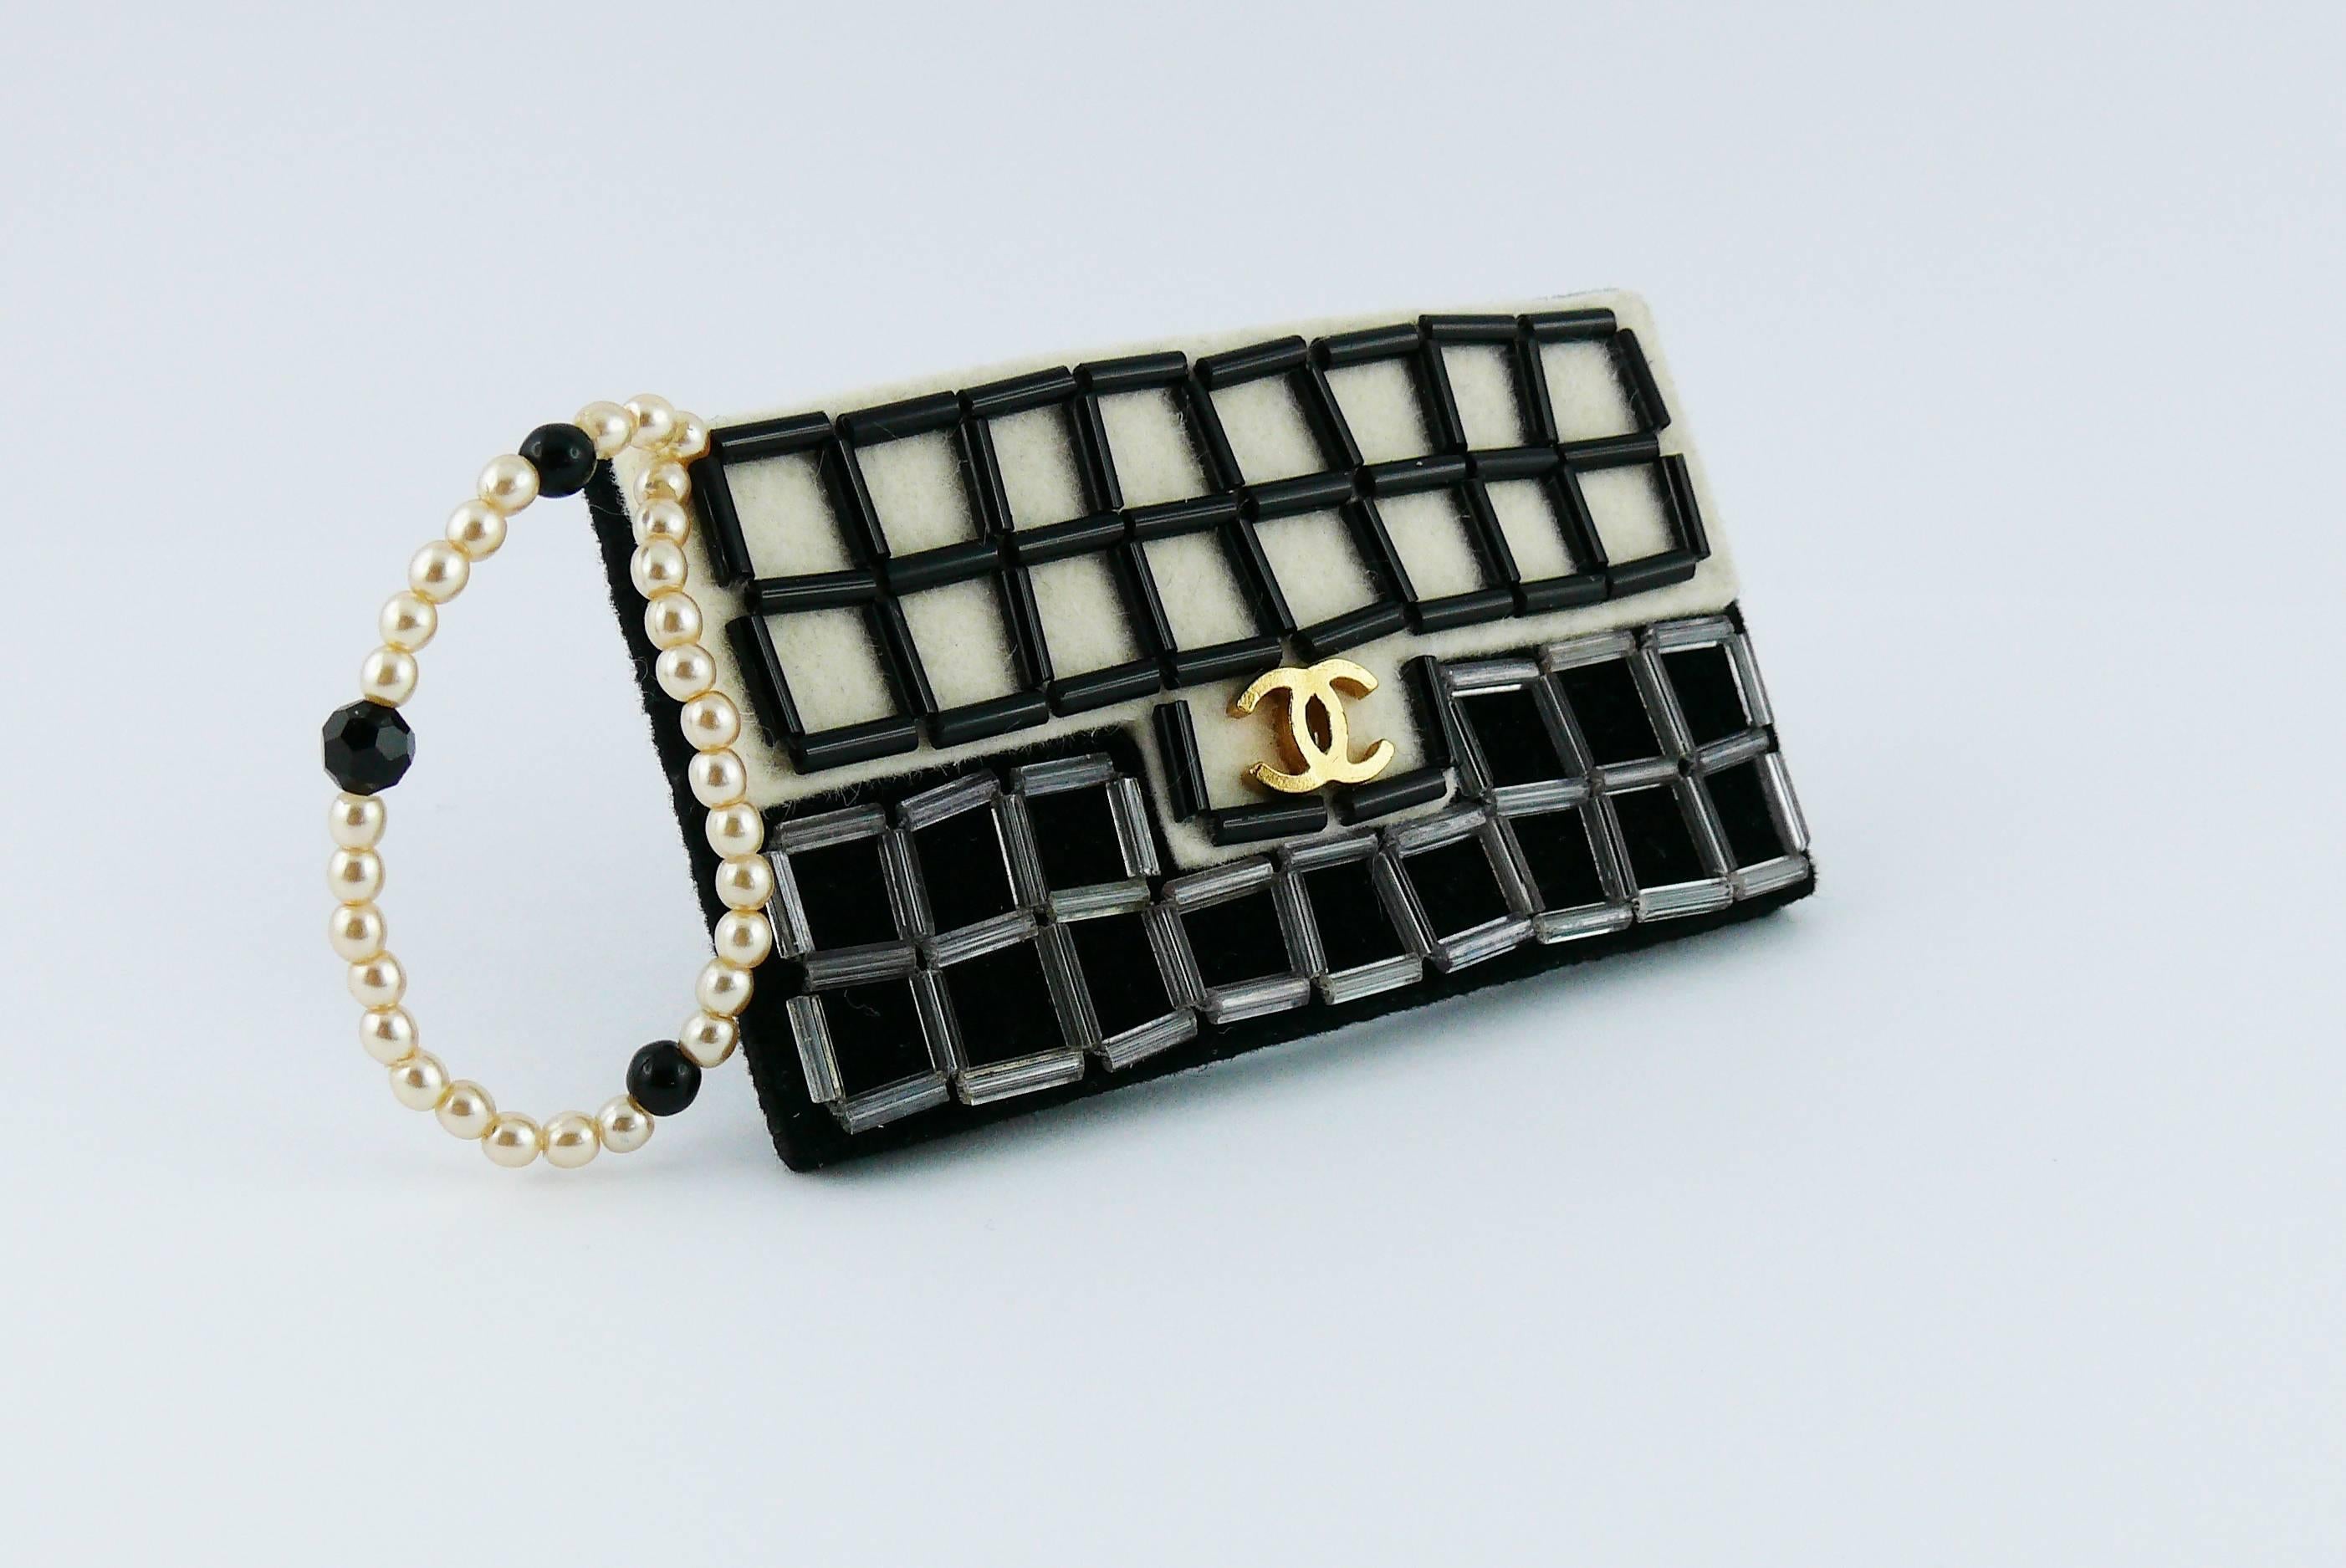 CHANEL large iconic 2.55 bag felt brooch featuring a faux pearl strap, glass beads and gold toned CC monogram on front.

Fall/Winter 2002.

Bar pin fastening.

Marked CHANEL 02 A Made in France.

Indicative measurements : length approx. 7 cm (2.76